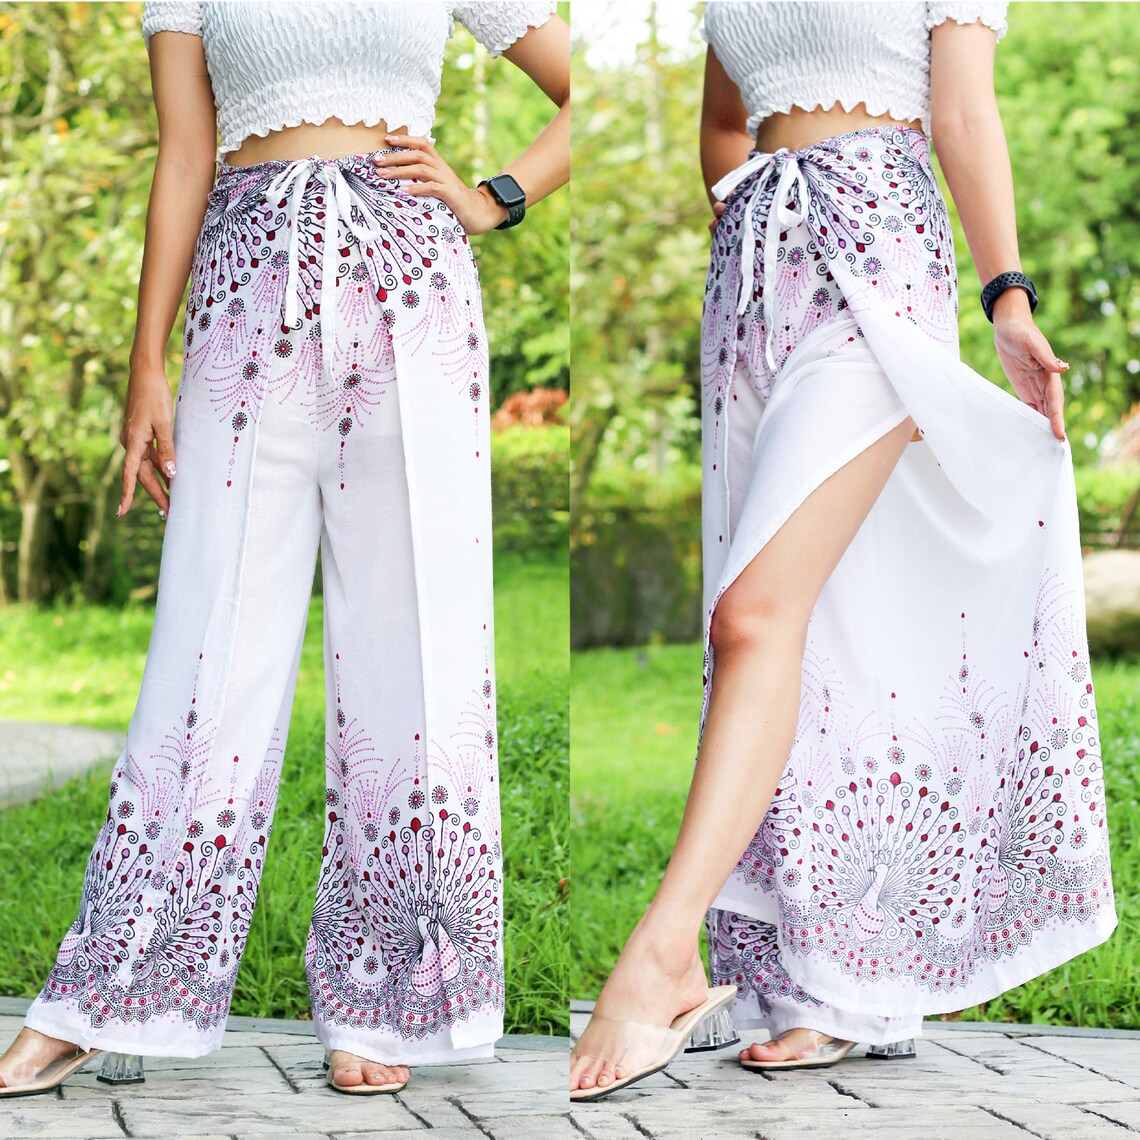 Fashionable white boho wrap pants with pink peacock print, perfect for a vibrant and trendy summer look.